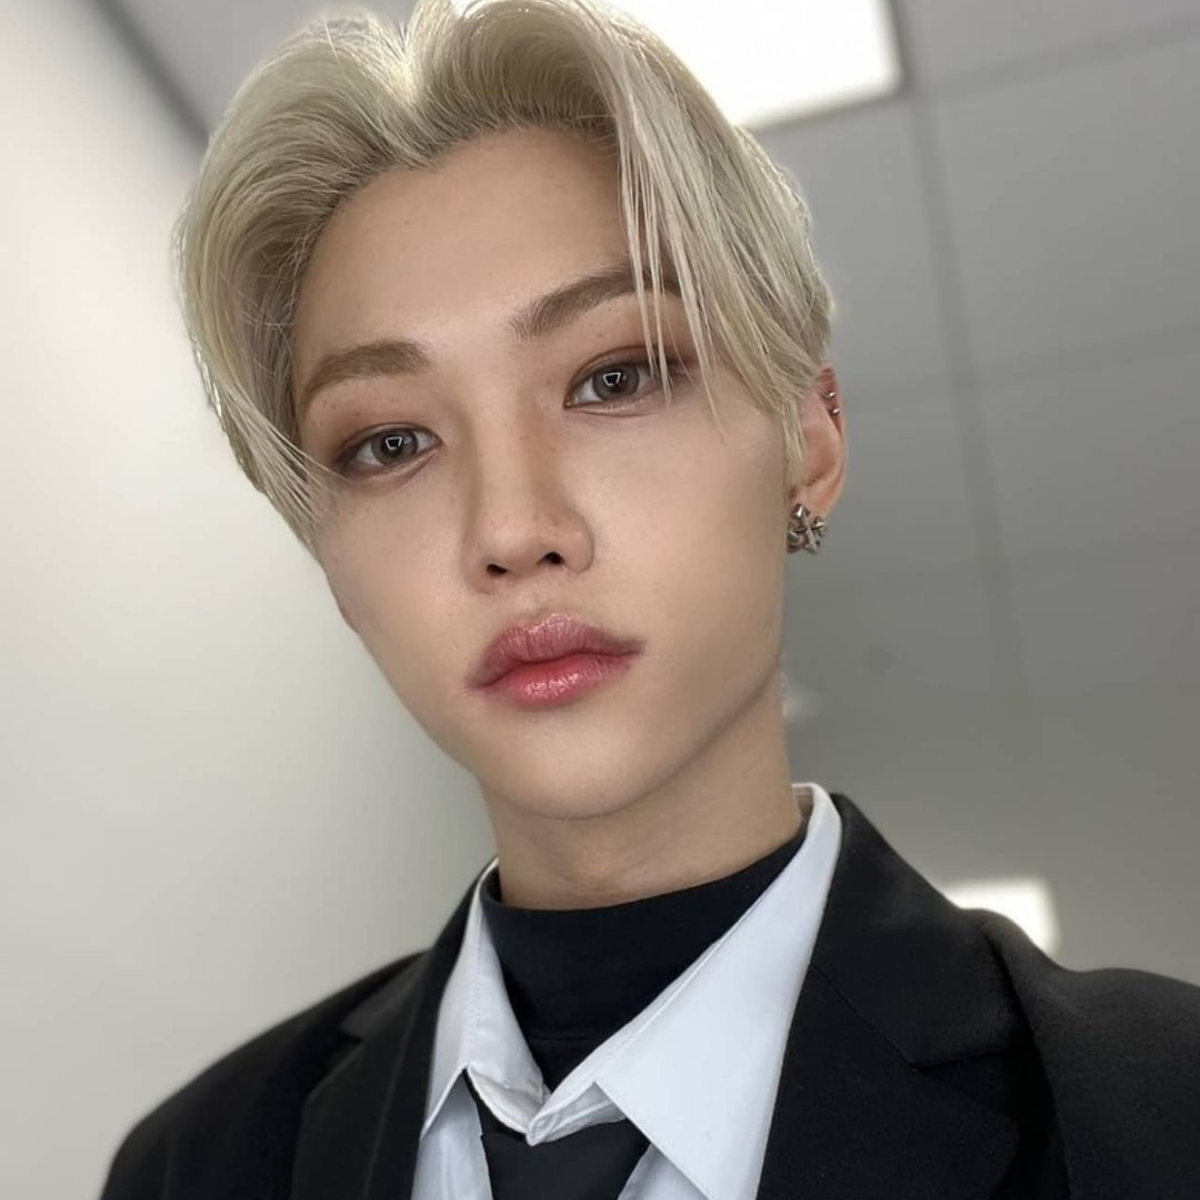 Let's take a look at some of the amazing looks by the sweet member of Stray Kids, Felix